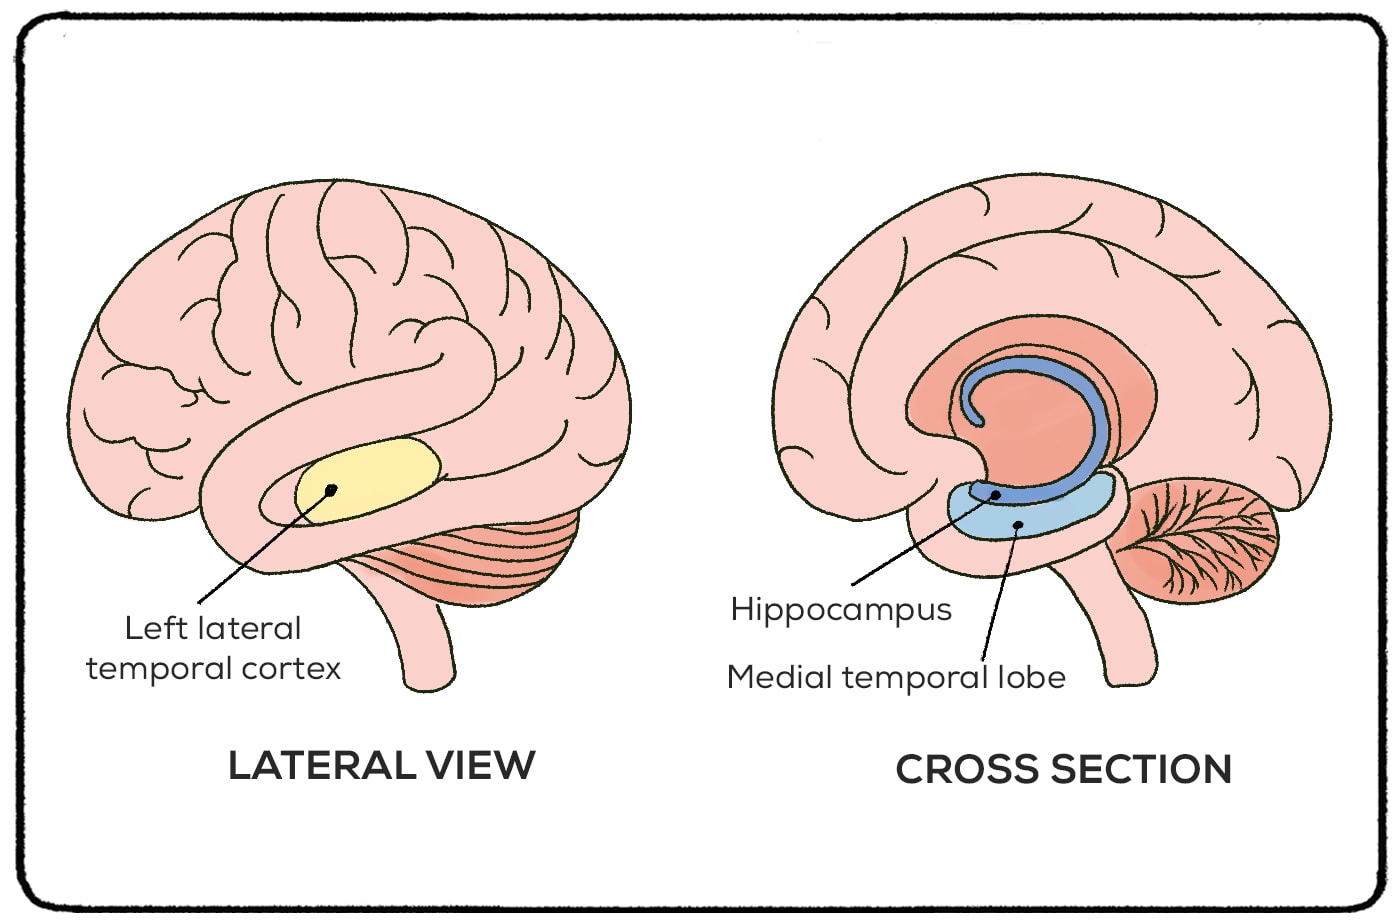 hippocampus and medial temporal lobes